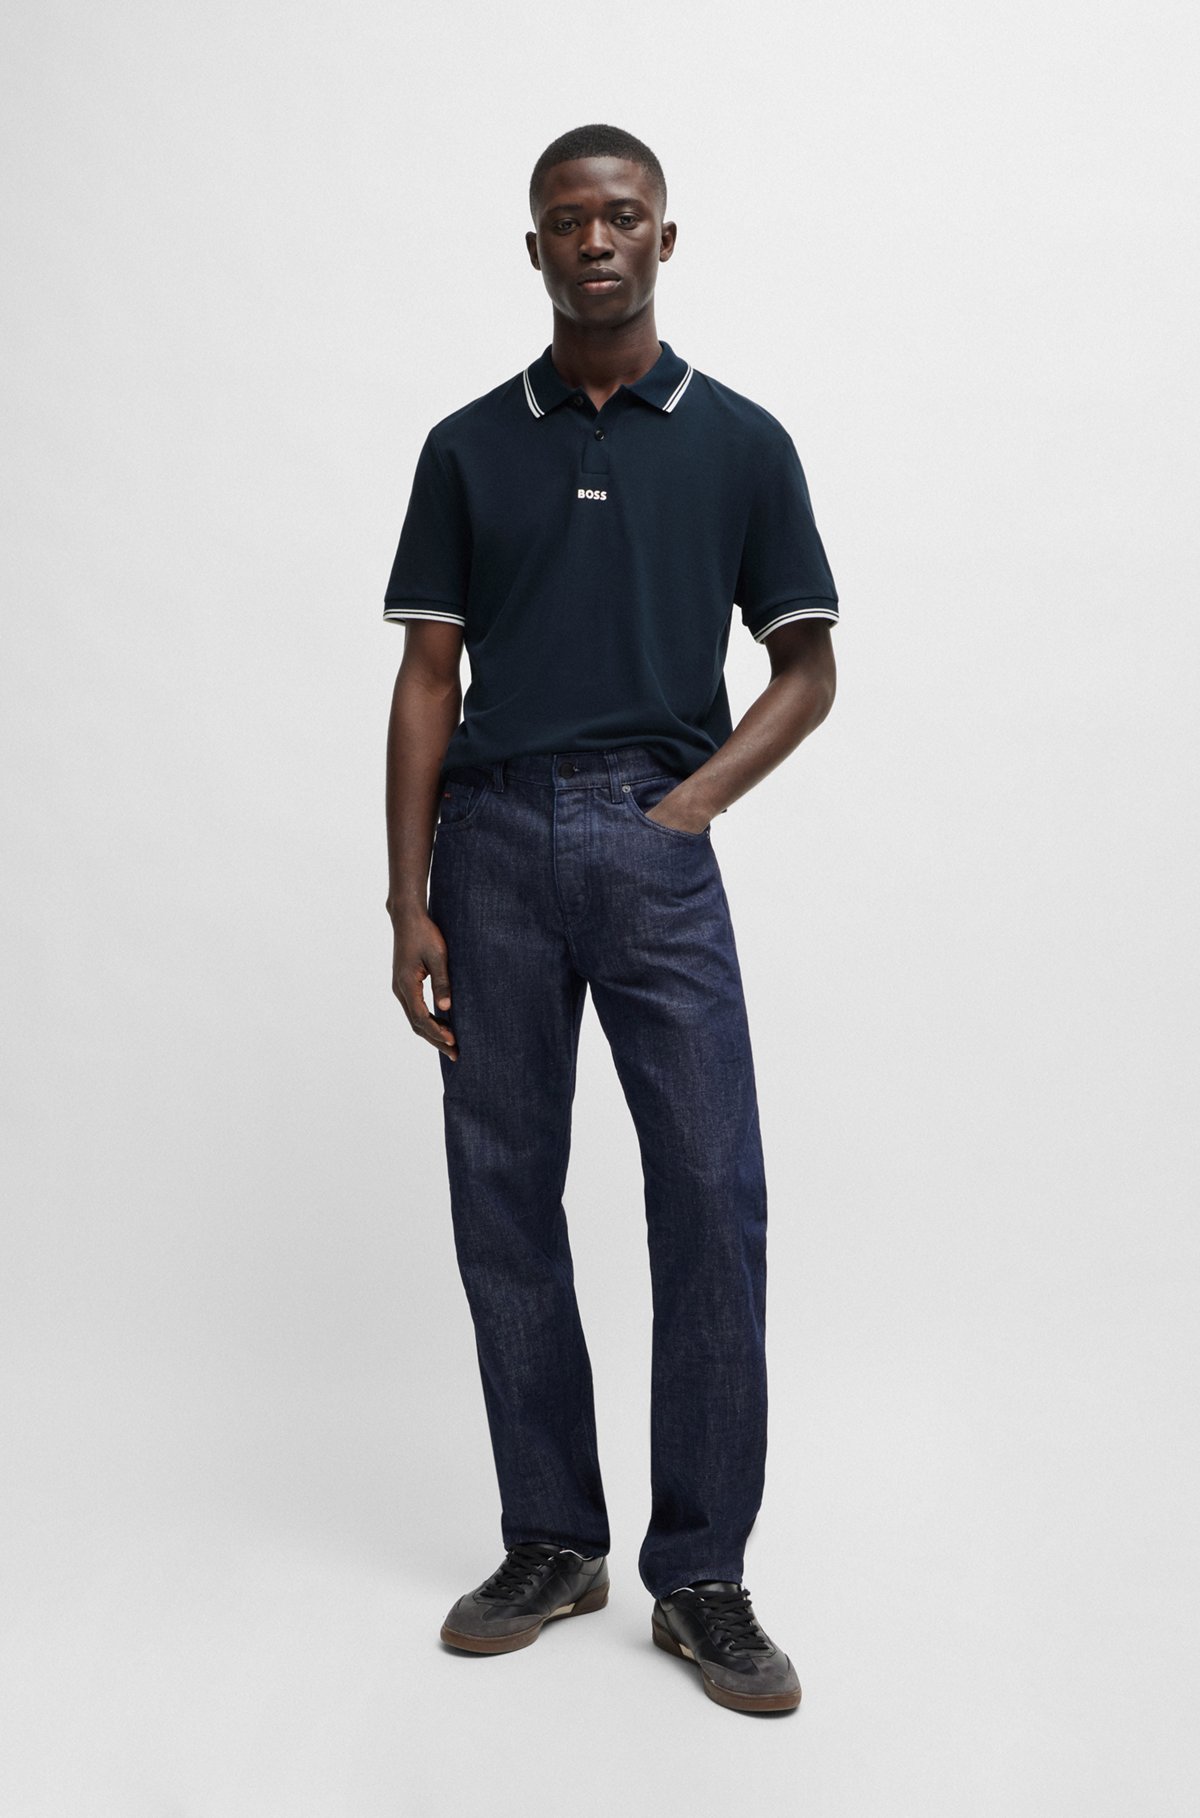 Cotton-piqué polo shirt with contrast logo and tipping, Dark Blue